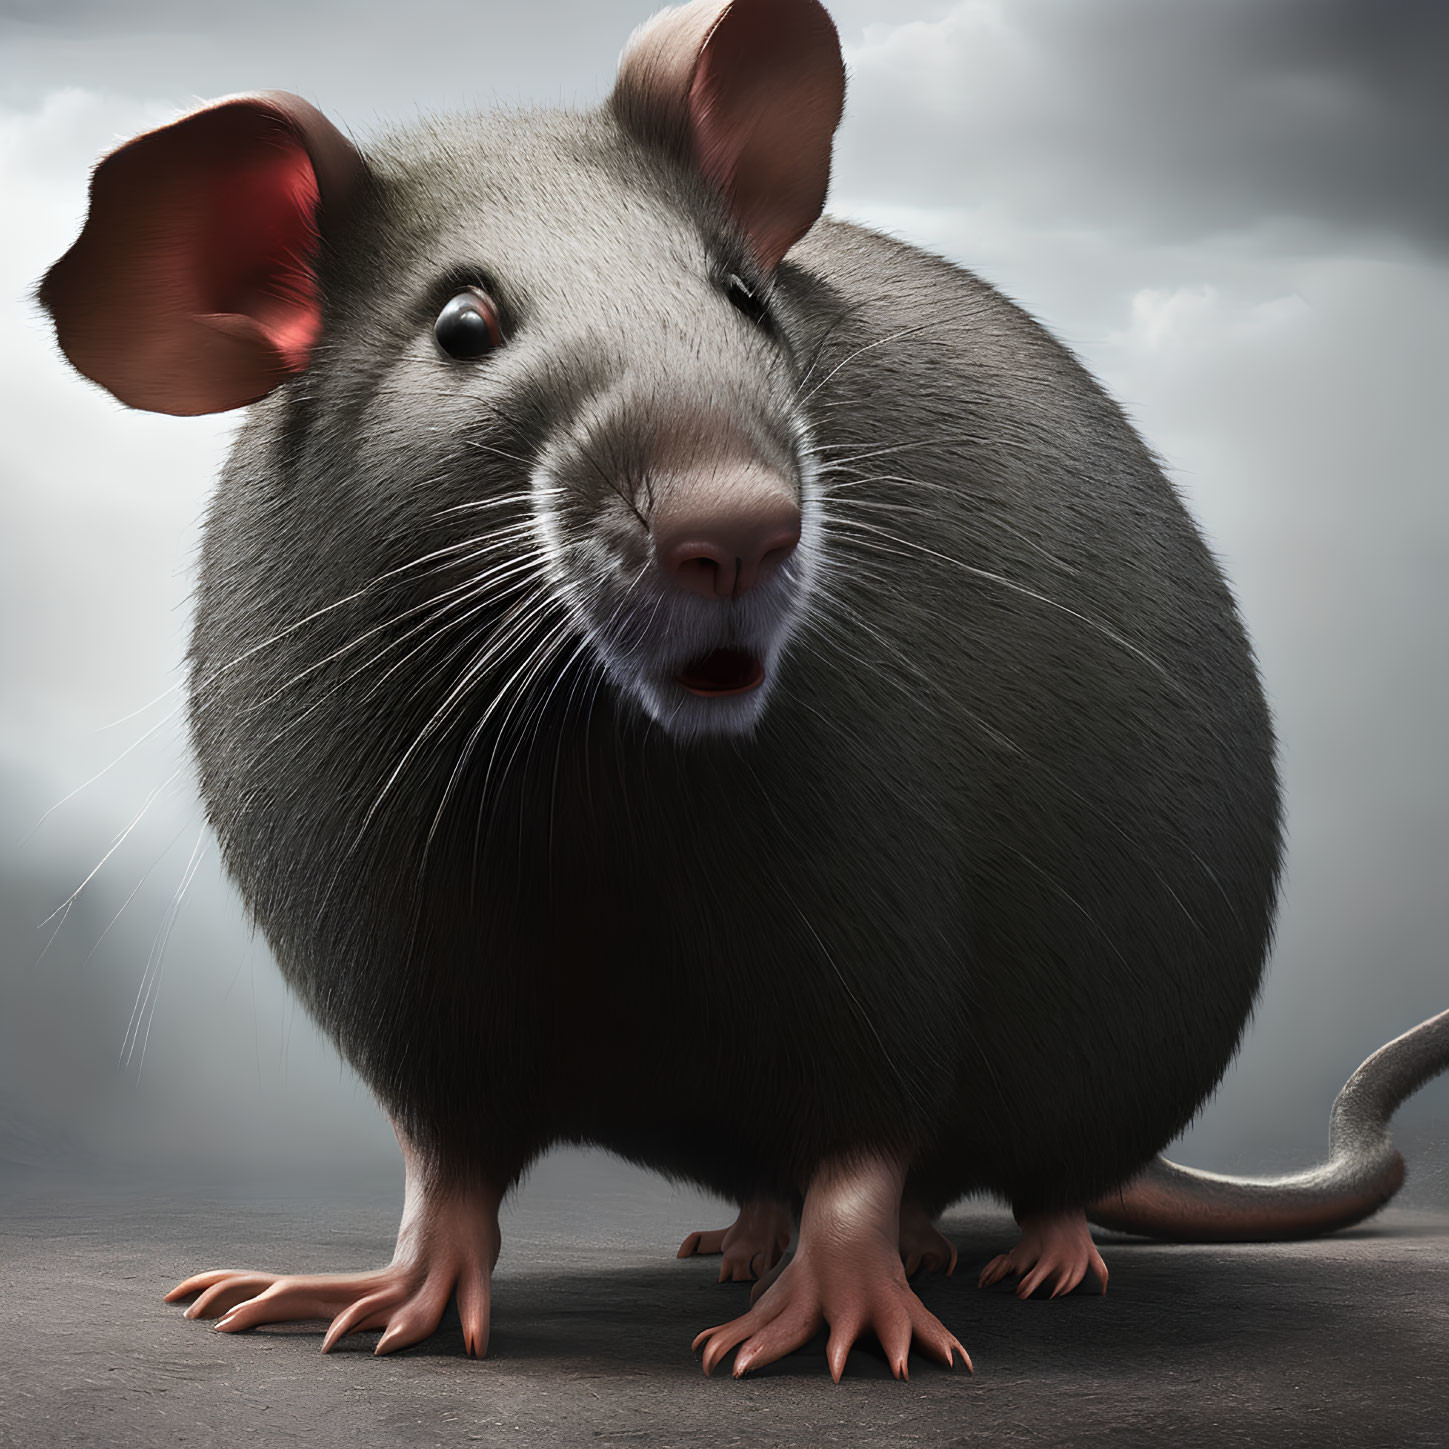 Detailed image of plump rat with shiny fur and large ears on grey background